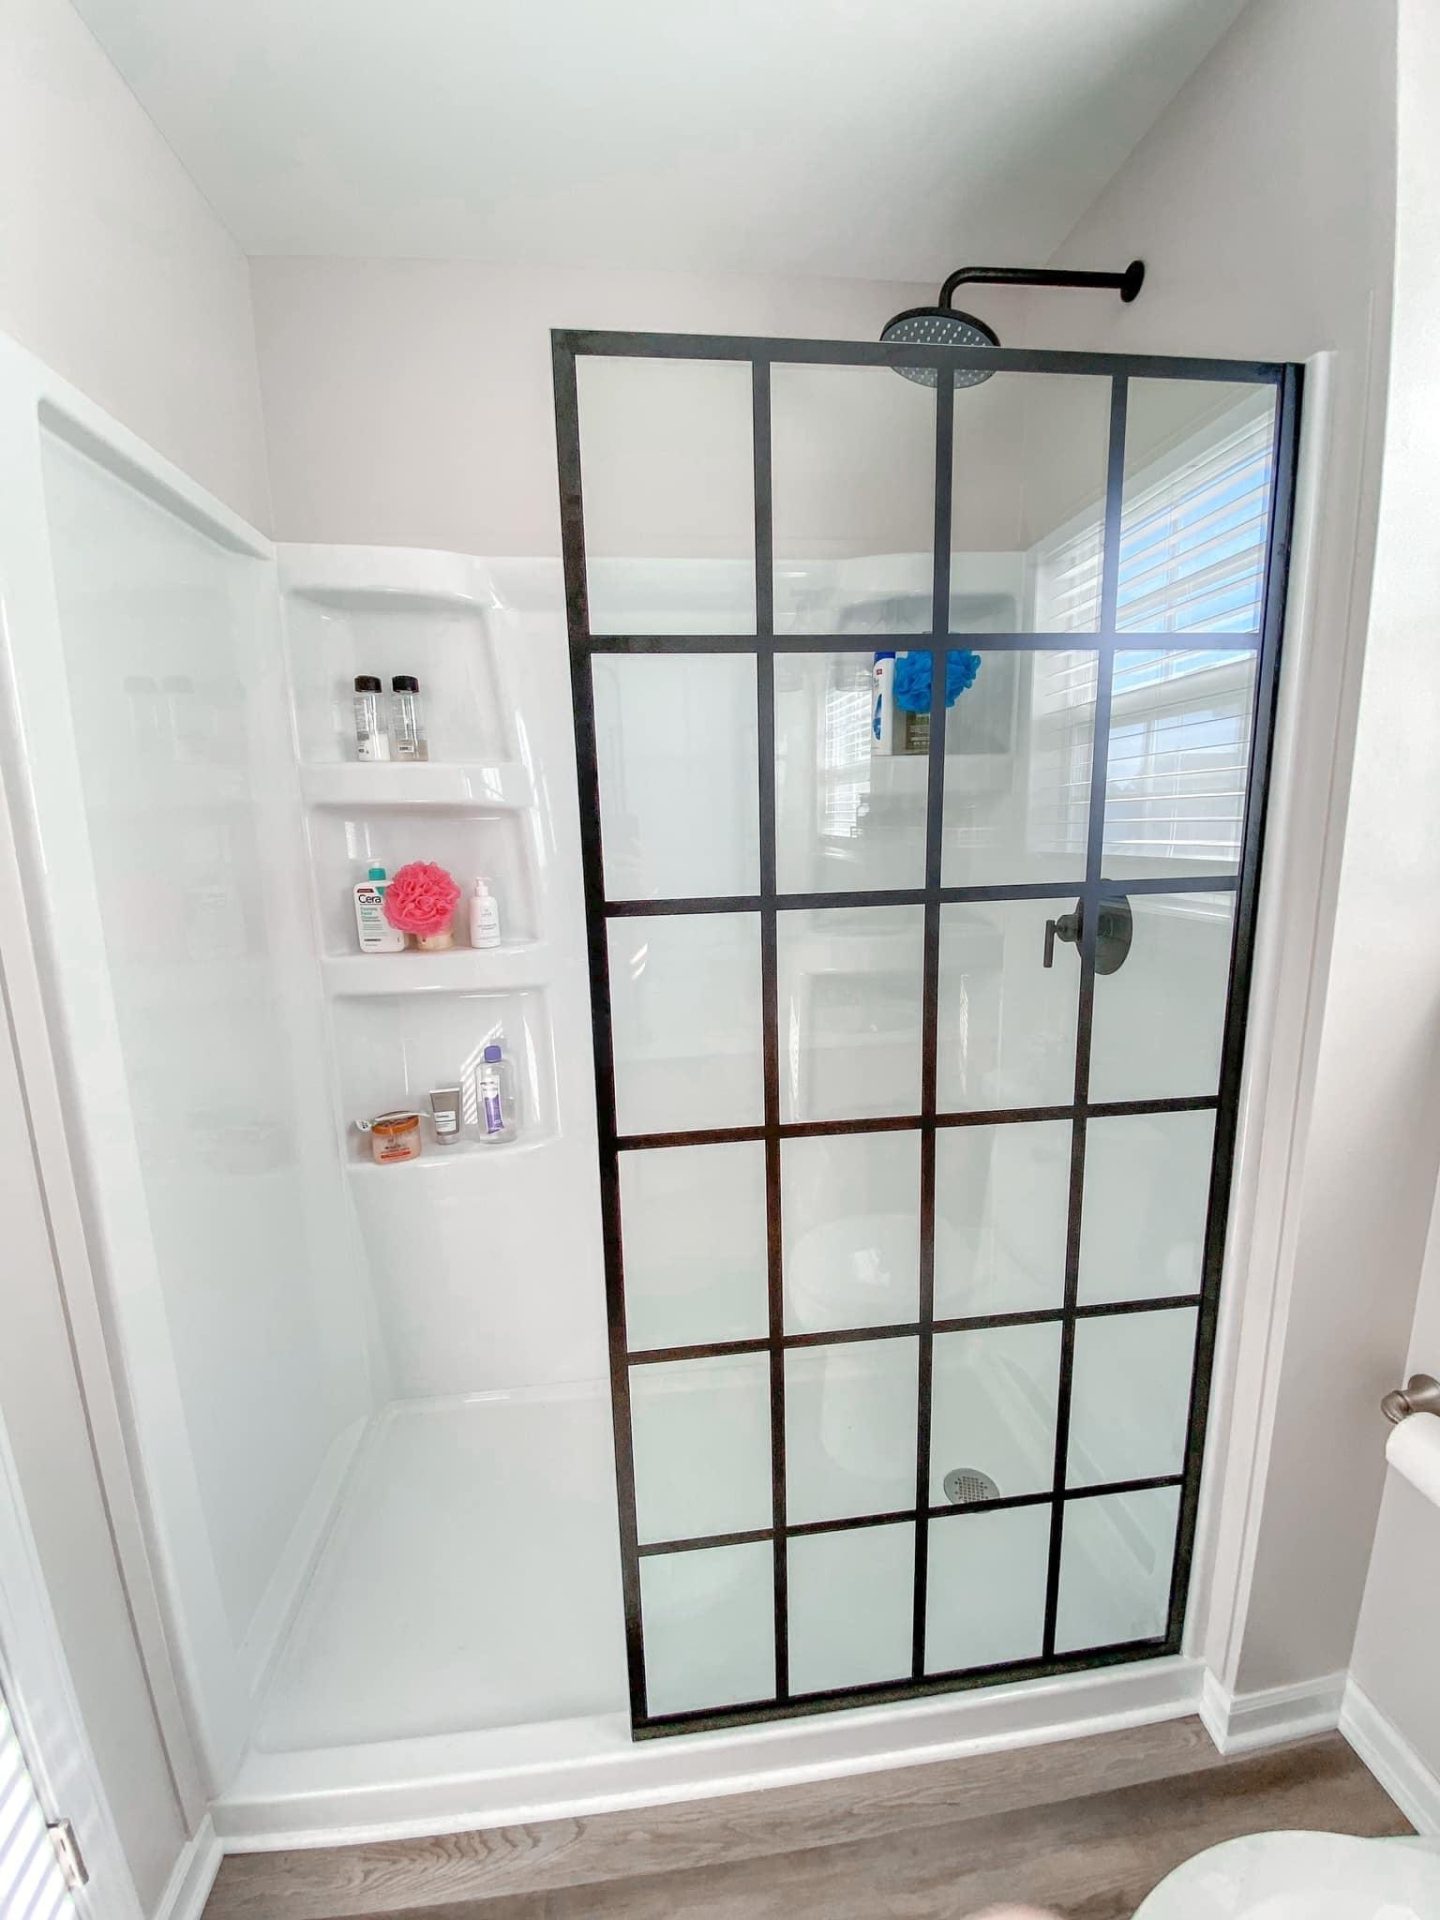 Functional and stylish bathroom renovations are our specialty at Midwest Remodel!